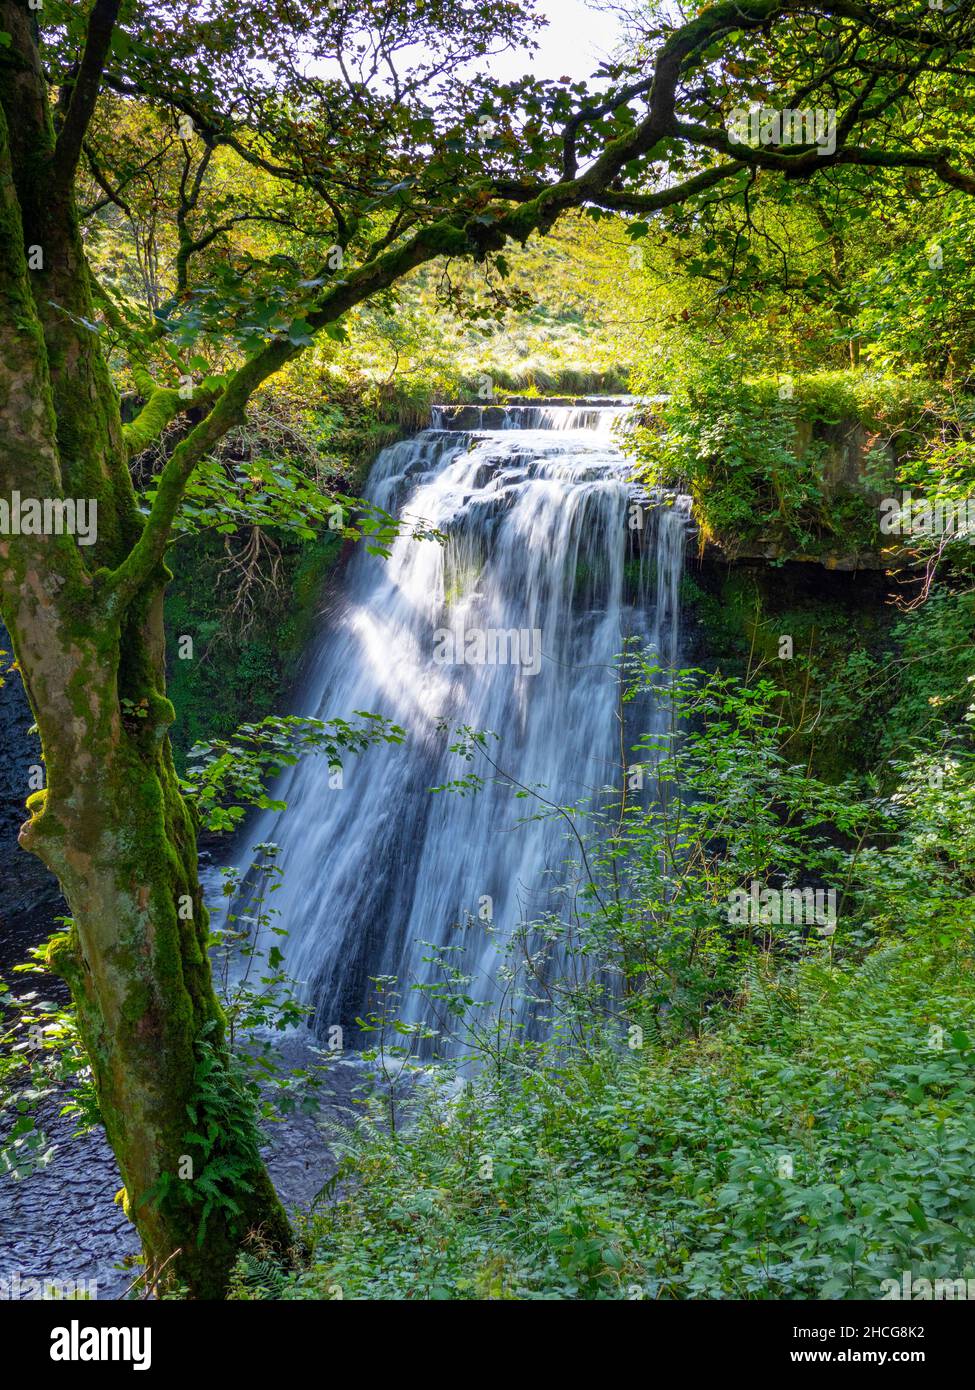 Aysgill Force, Gayle Beck, Wensleydale. Stock Photo